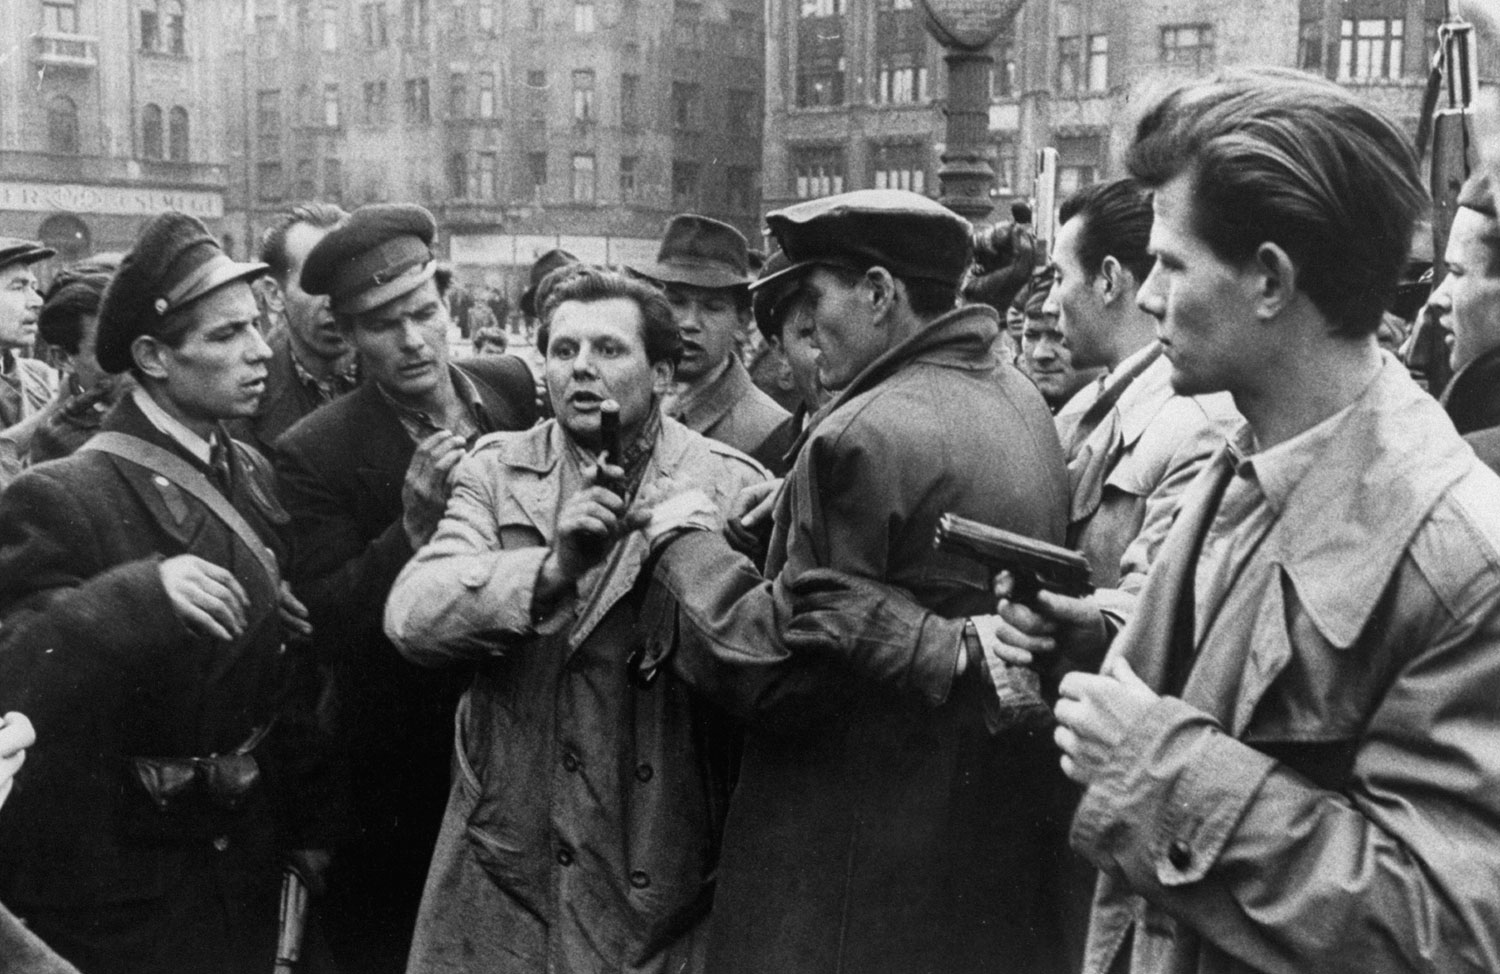 Not published in LIFE. Hungarian Revolution, 1956.